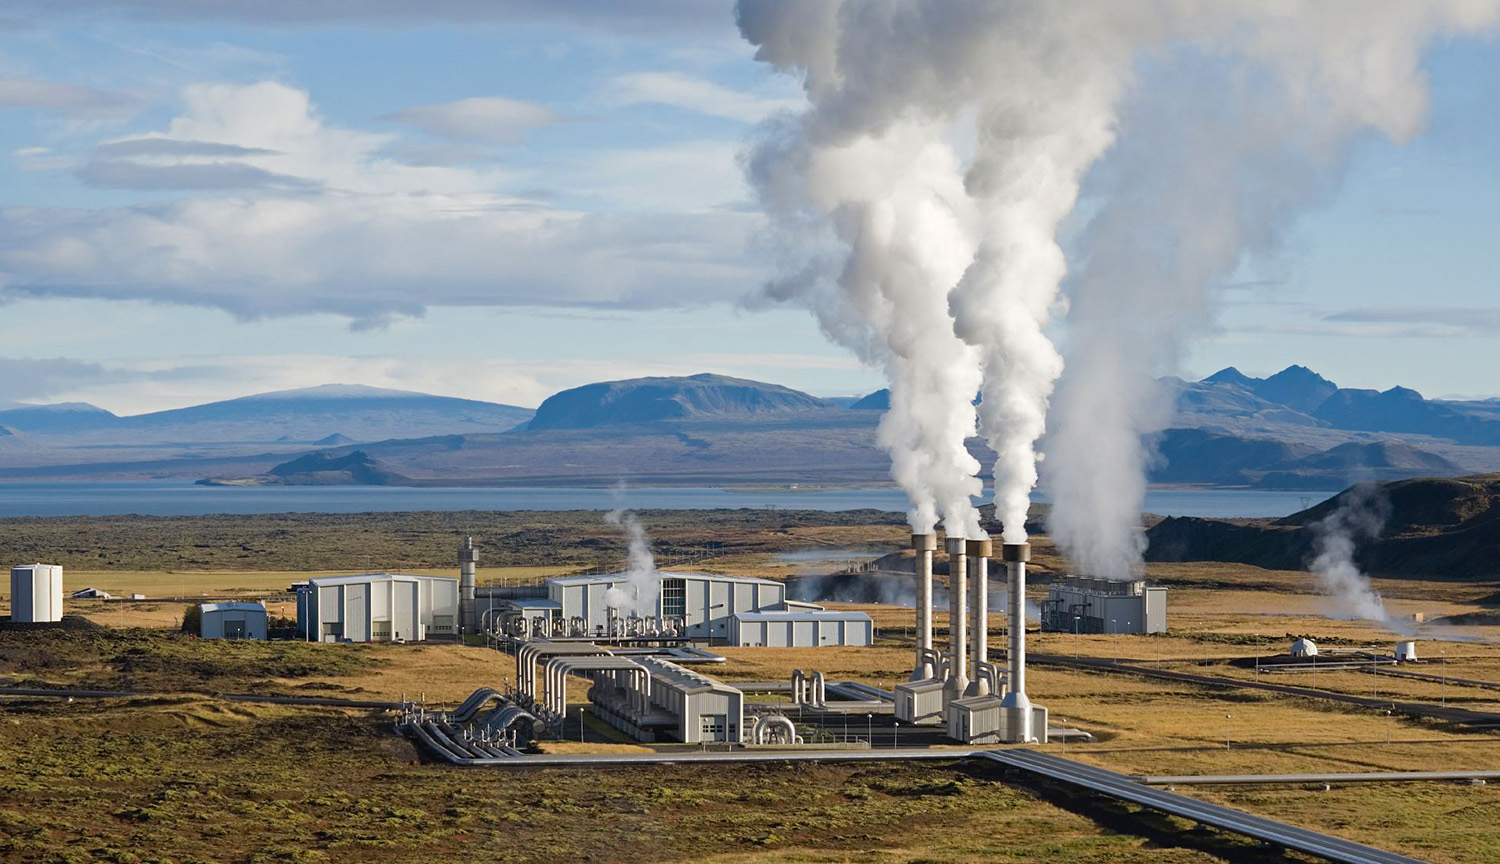 Photograph of a geothermal power plant in Iceland.